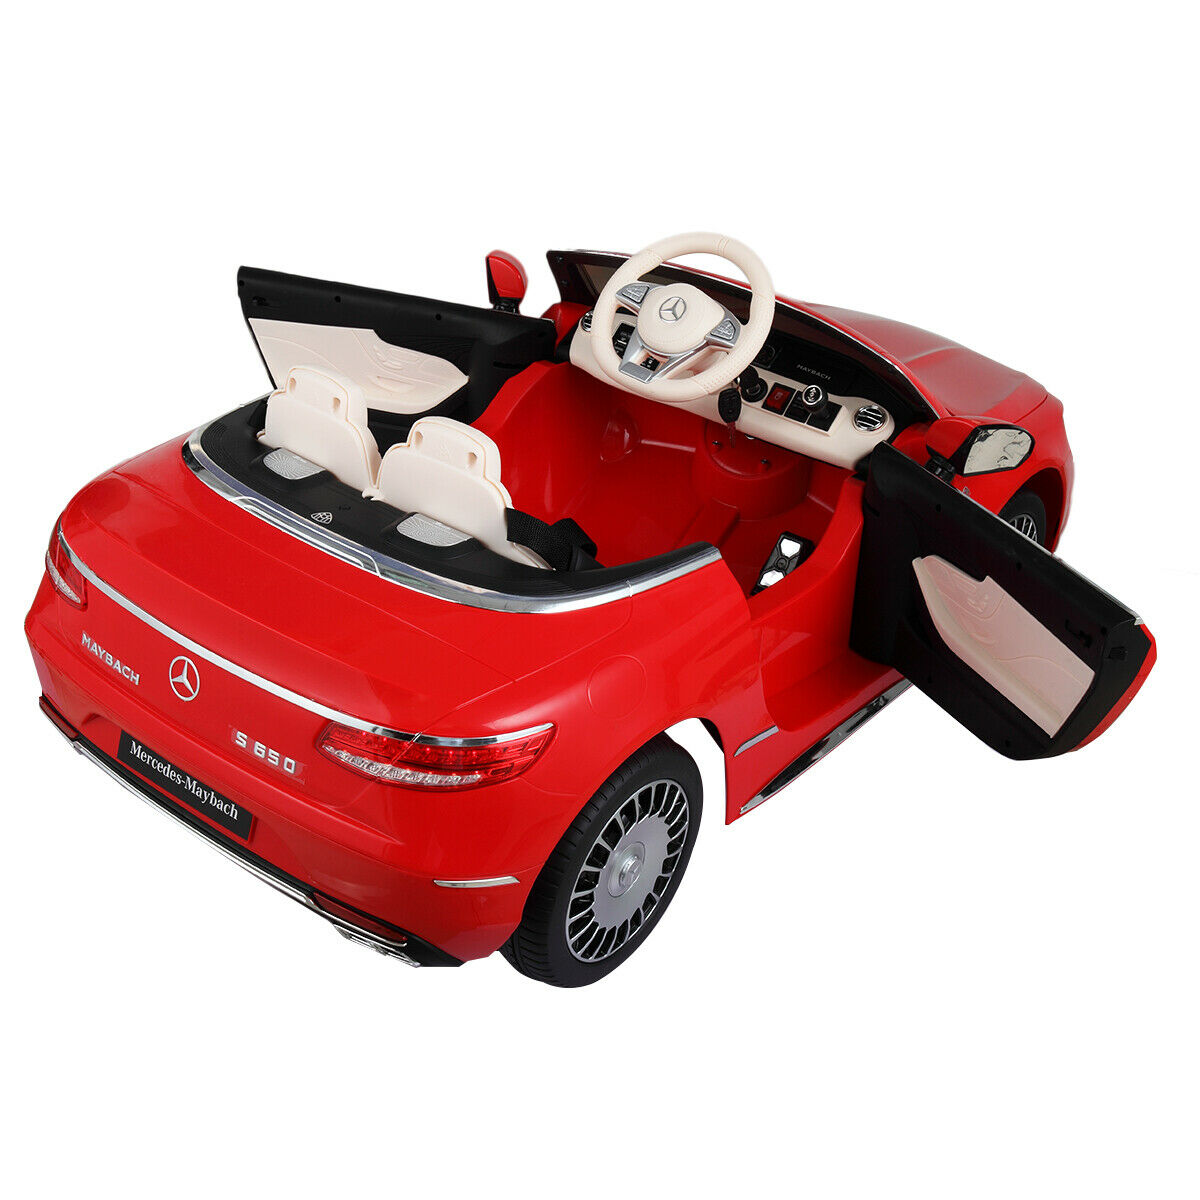 CIPACHO 12V Electric Battery Powered Ride On Car for Kids, Electric Vehicles for Boys Girls, with Remote Control MP3 LED Lights, Red